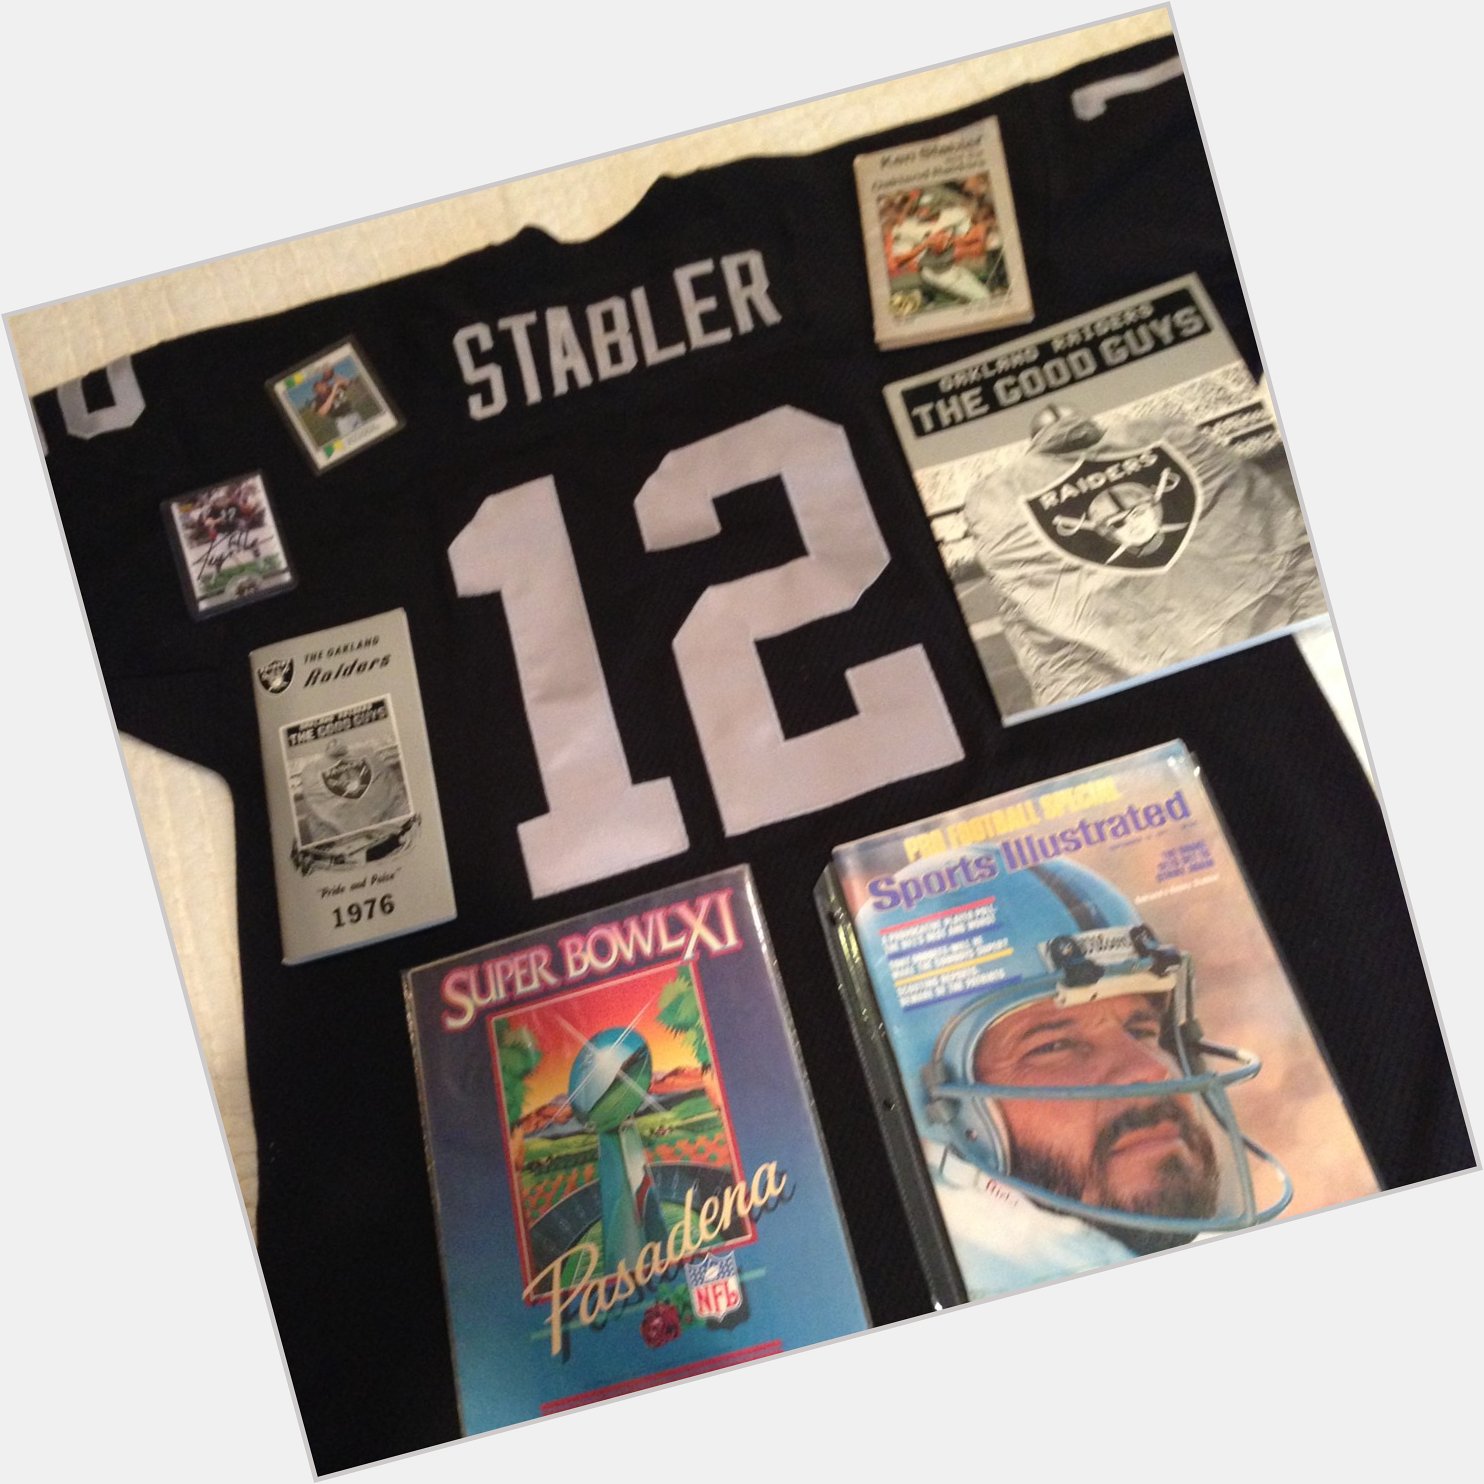 Merry Christmas and Happy Birthday in heaven to my favorite childhood QB, Ken Stabler.  